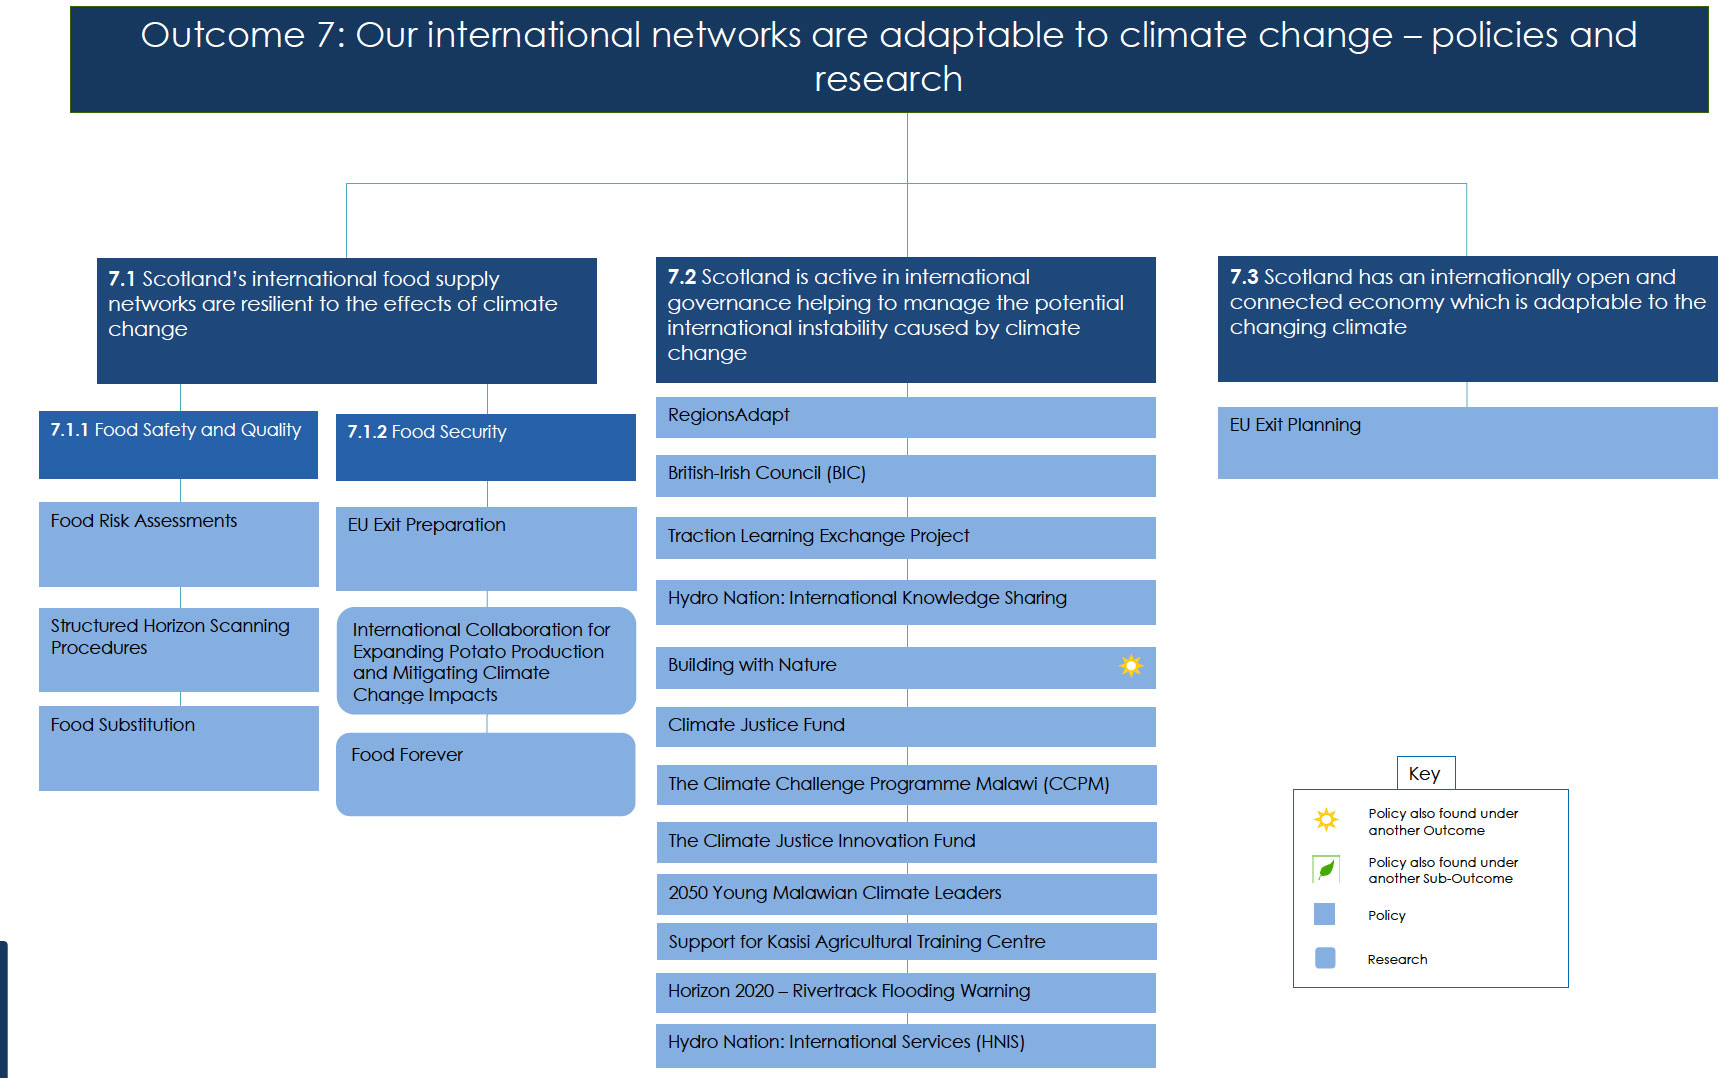 Outcome 7: Our international networks are adaptable to climate change – policies and research